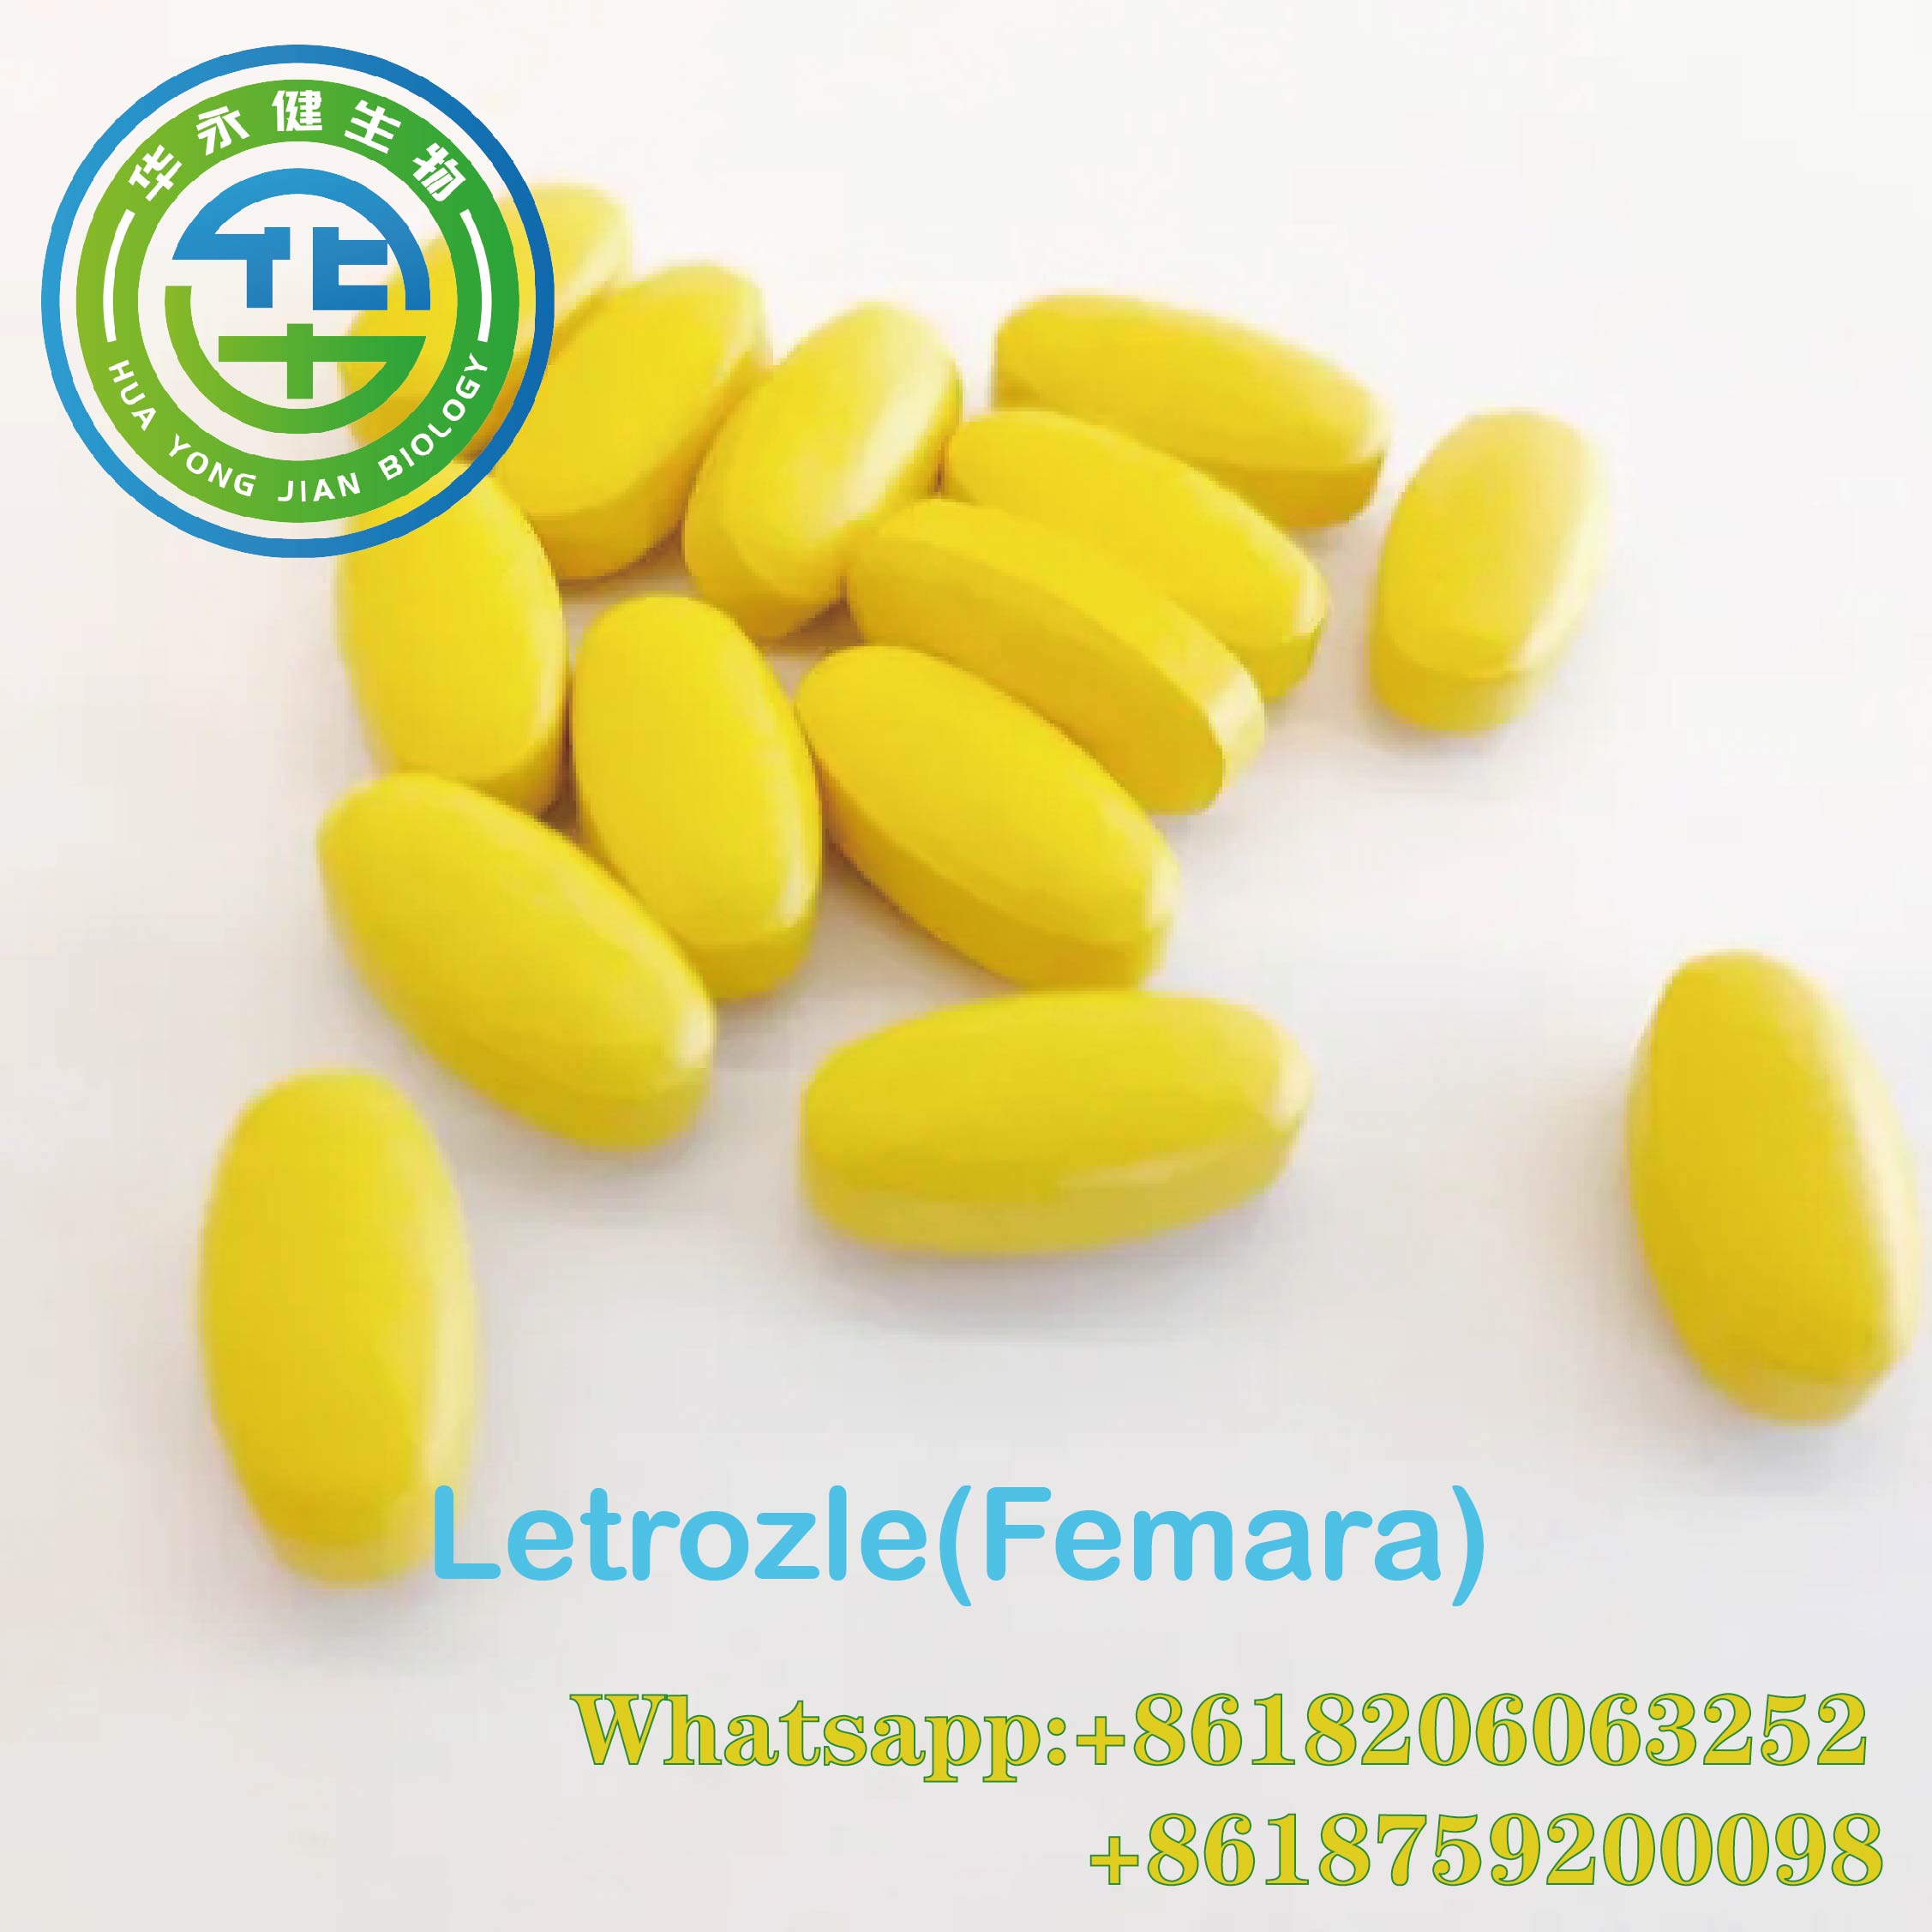 99.8% Purity Letrozole 2.5mg Tablet Oral Anabolic Steroids 100/bottle Femara  For Weight Loss